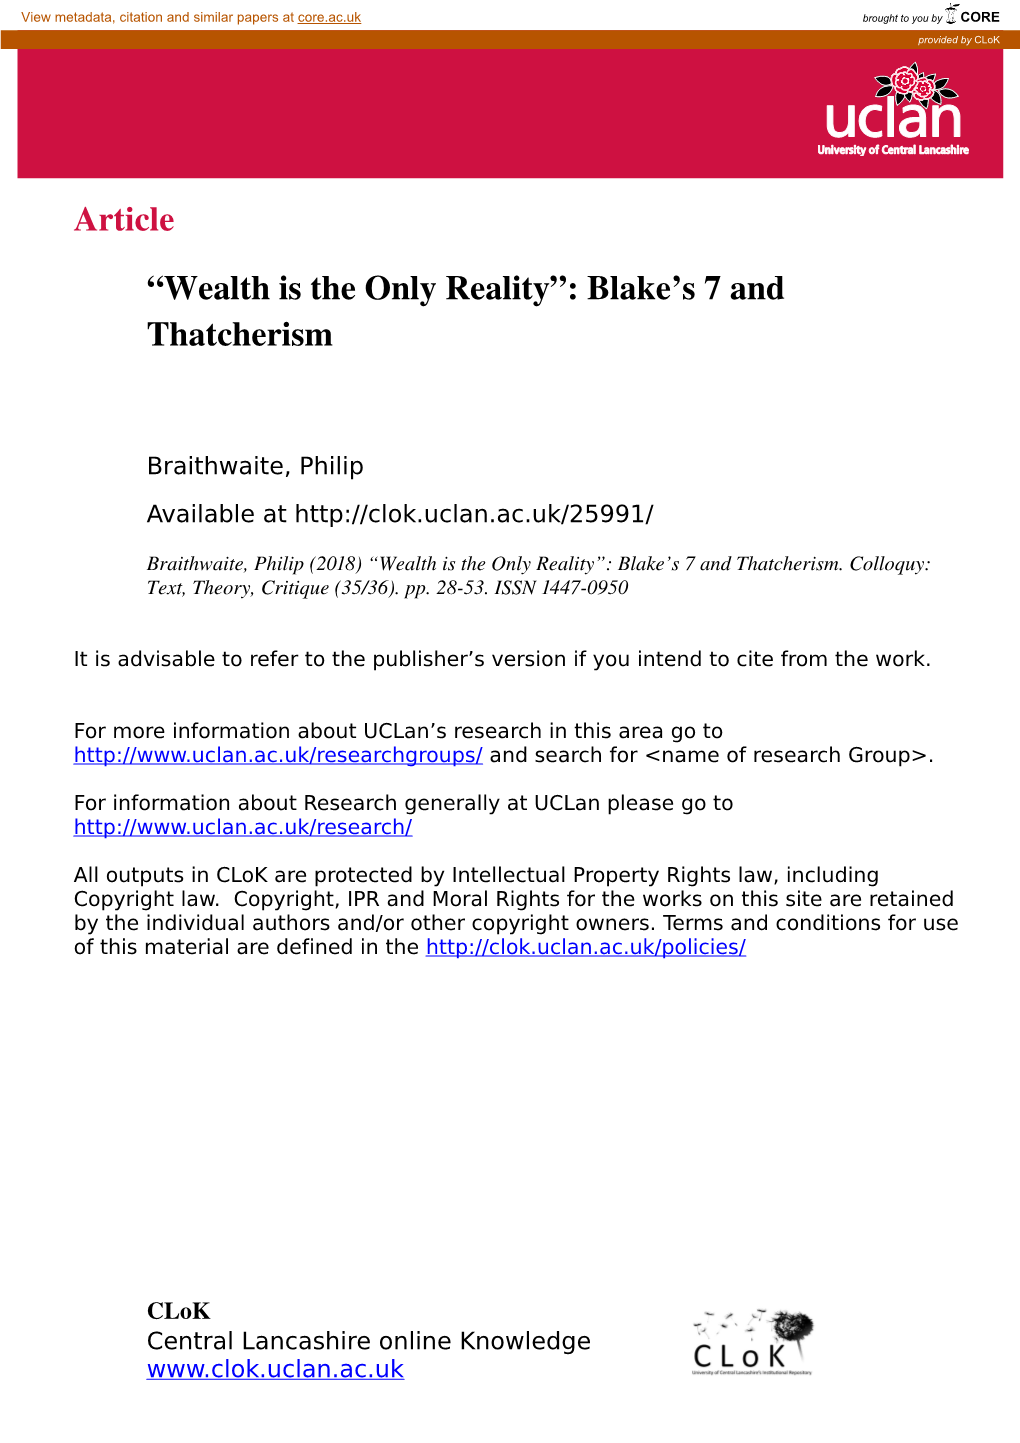 “Wealth Is the Only Reality”: Blake's 7 and Thatcherism